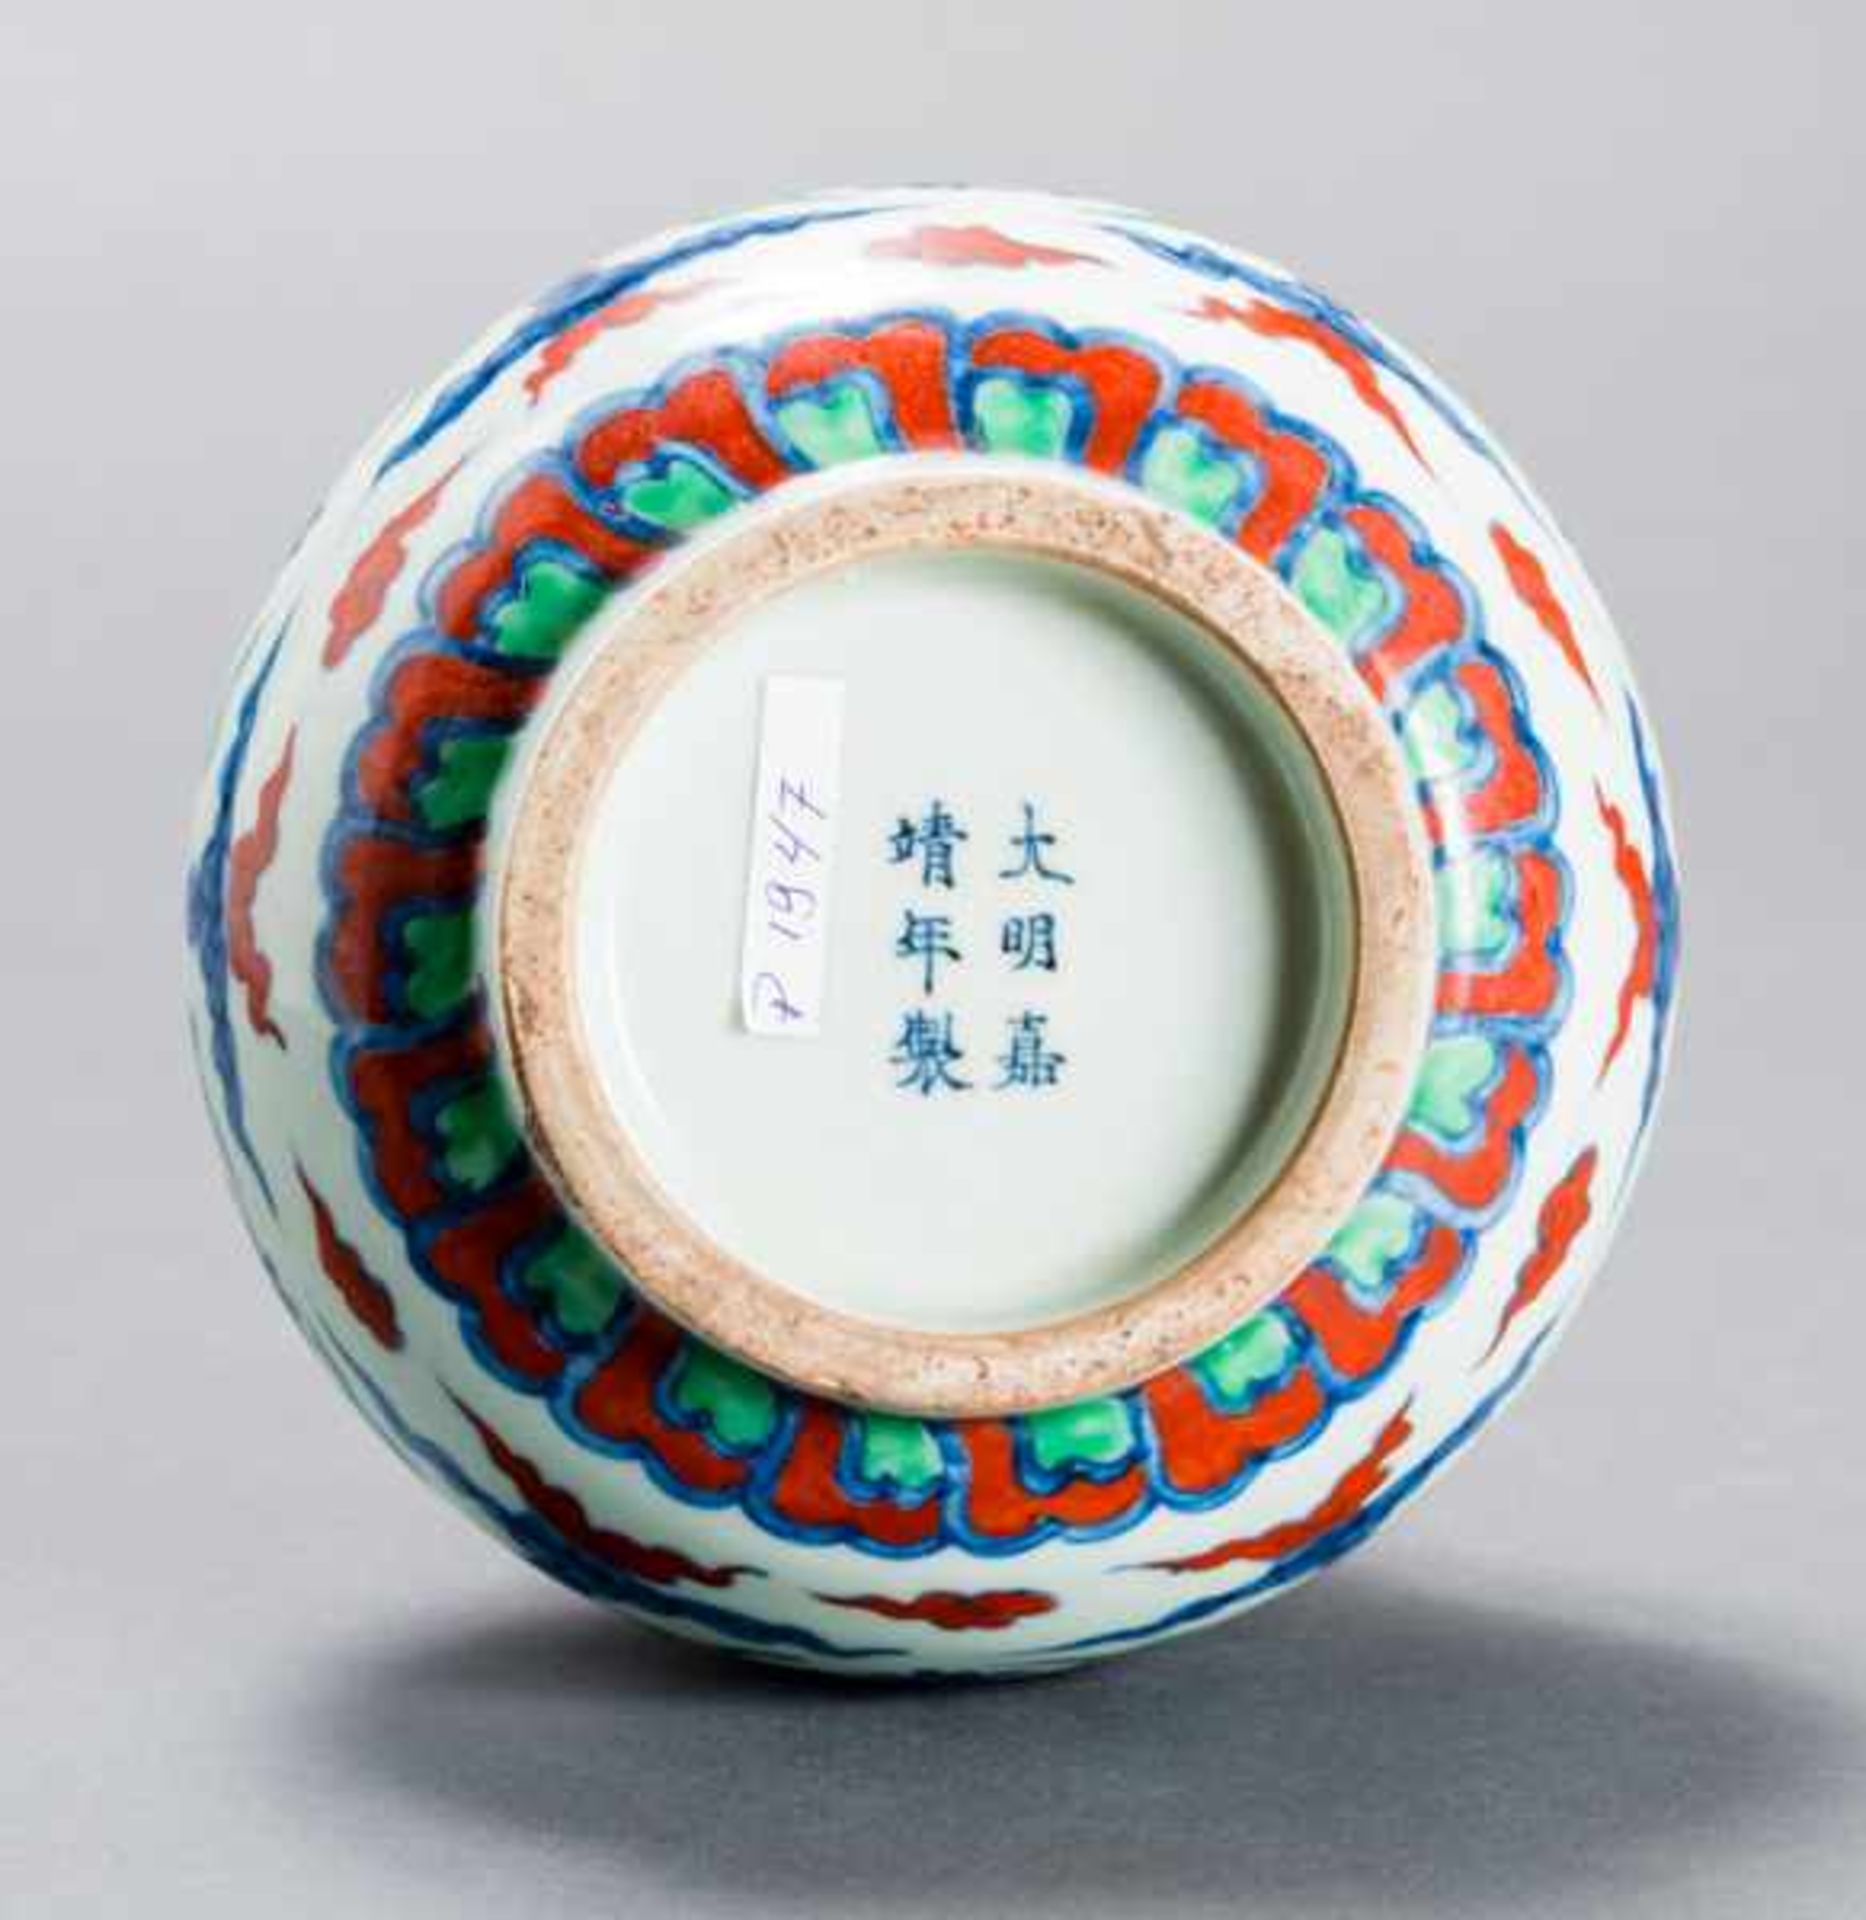 VASE WITH BLOSSOMS AND ENDLESS KNOT Porcelain with enamel painting. China, Ming-dynasty - Image 3 of 3